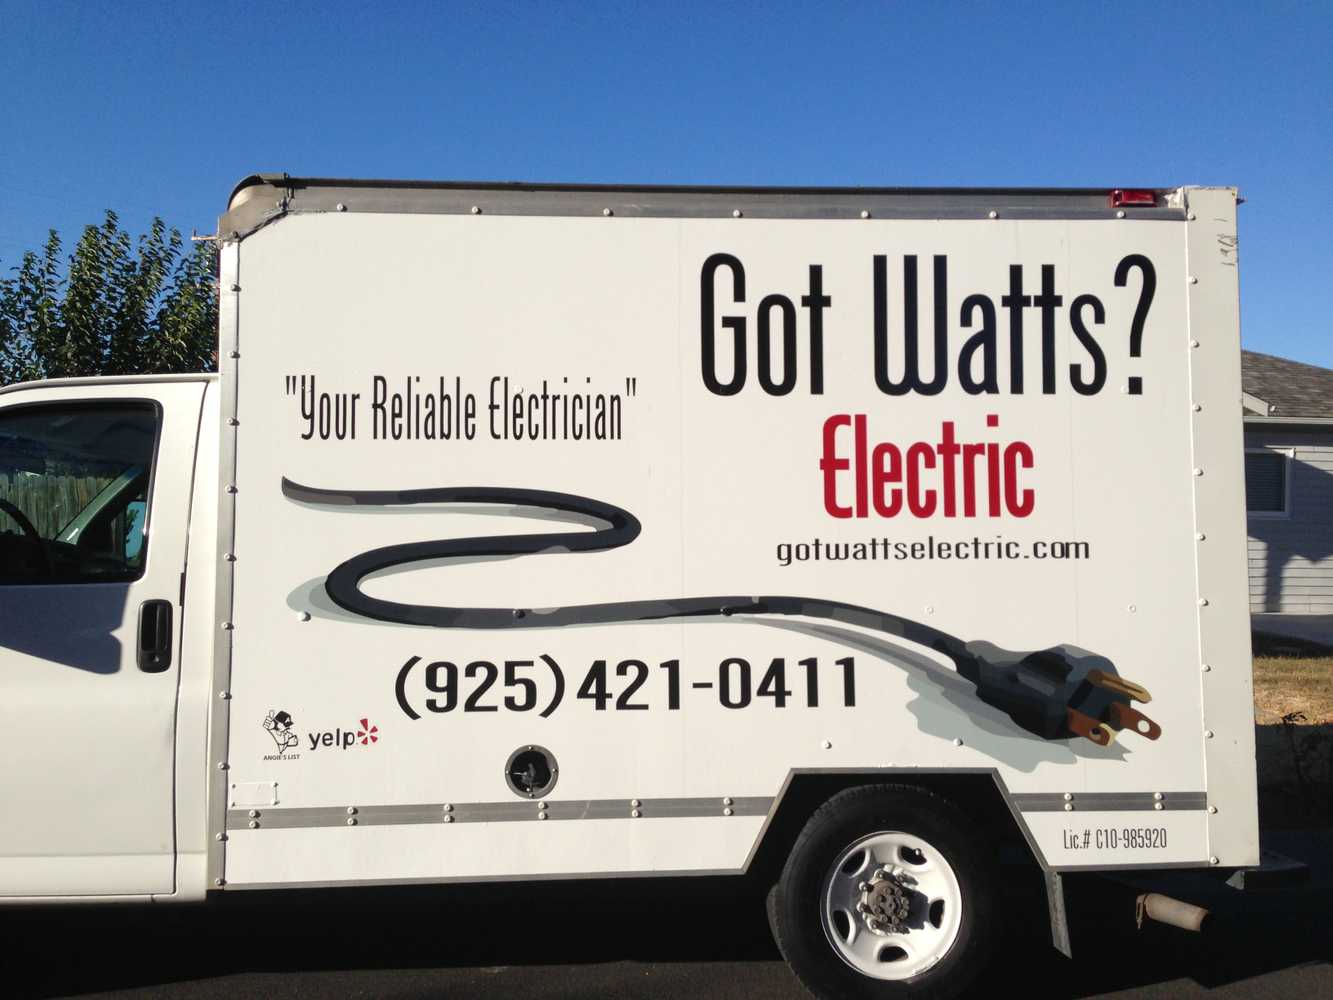 Photos from Got Watts Electric